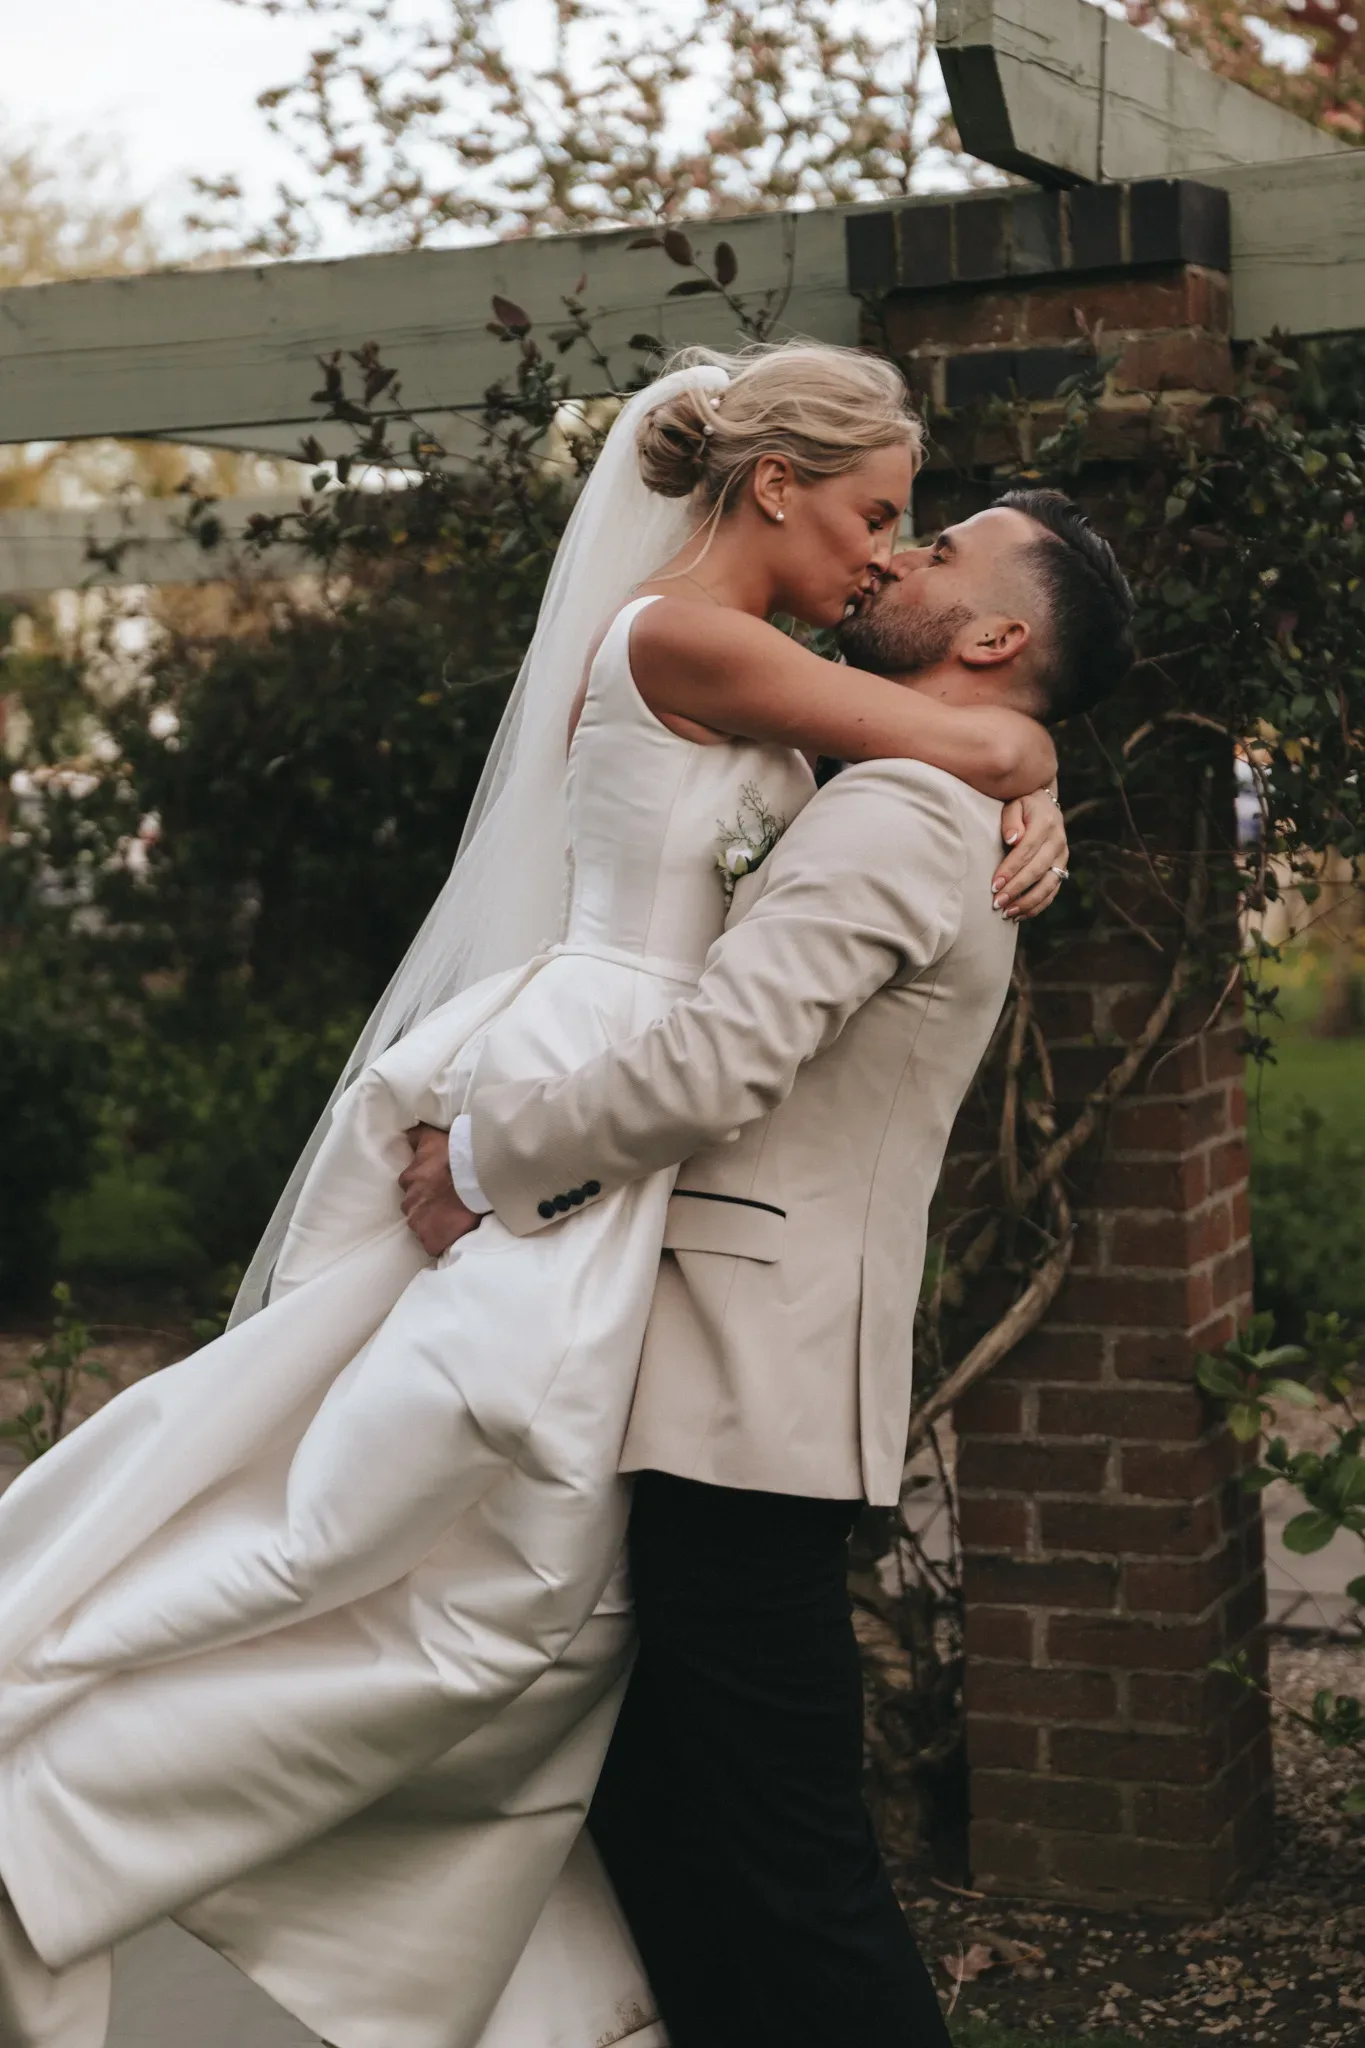 A bride in a white gown and a groom in a beige suit share a passionate kiss. the groom lifts the bride slightly off the ground. they stand under a garden archway surrounded by lush greenery.